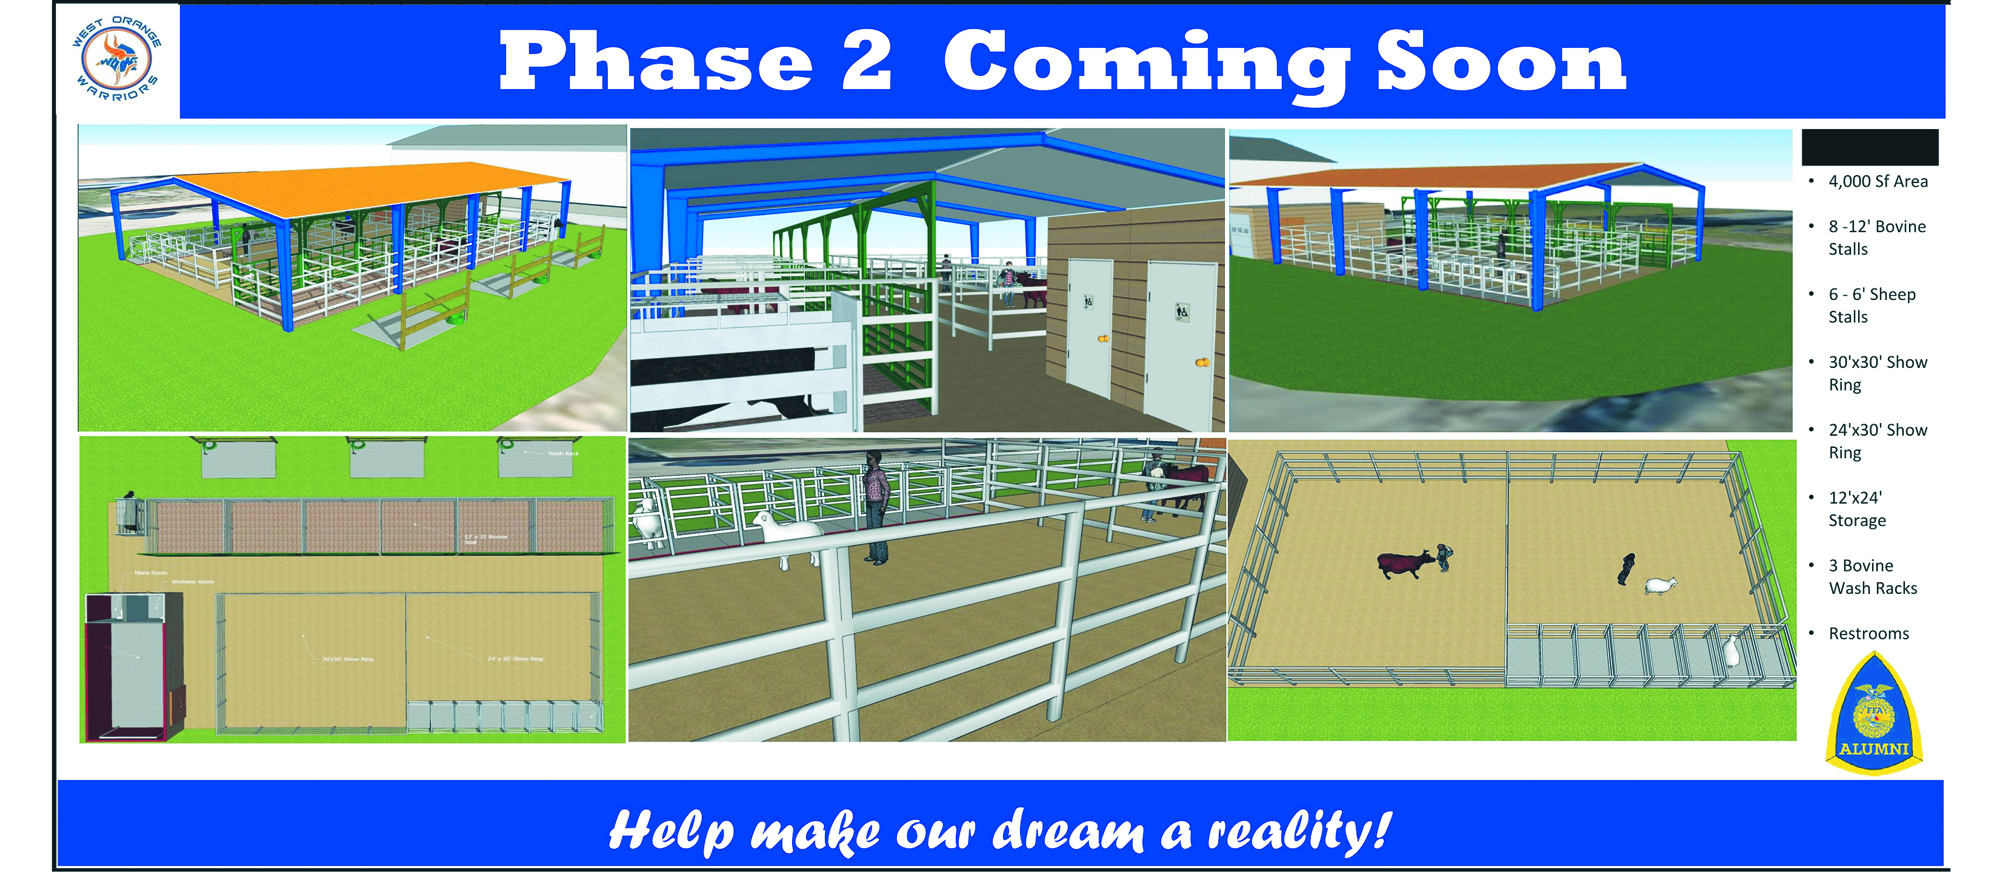 The concepts for the pole barn include bovine wash racks and stalls, sheep stalls, storage and show rings. (Courtesy Kristy Lightbody and Chuck Sauls)